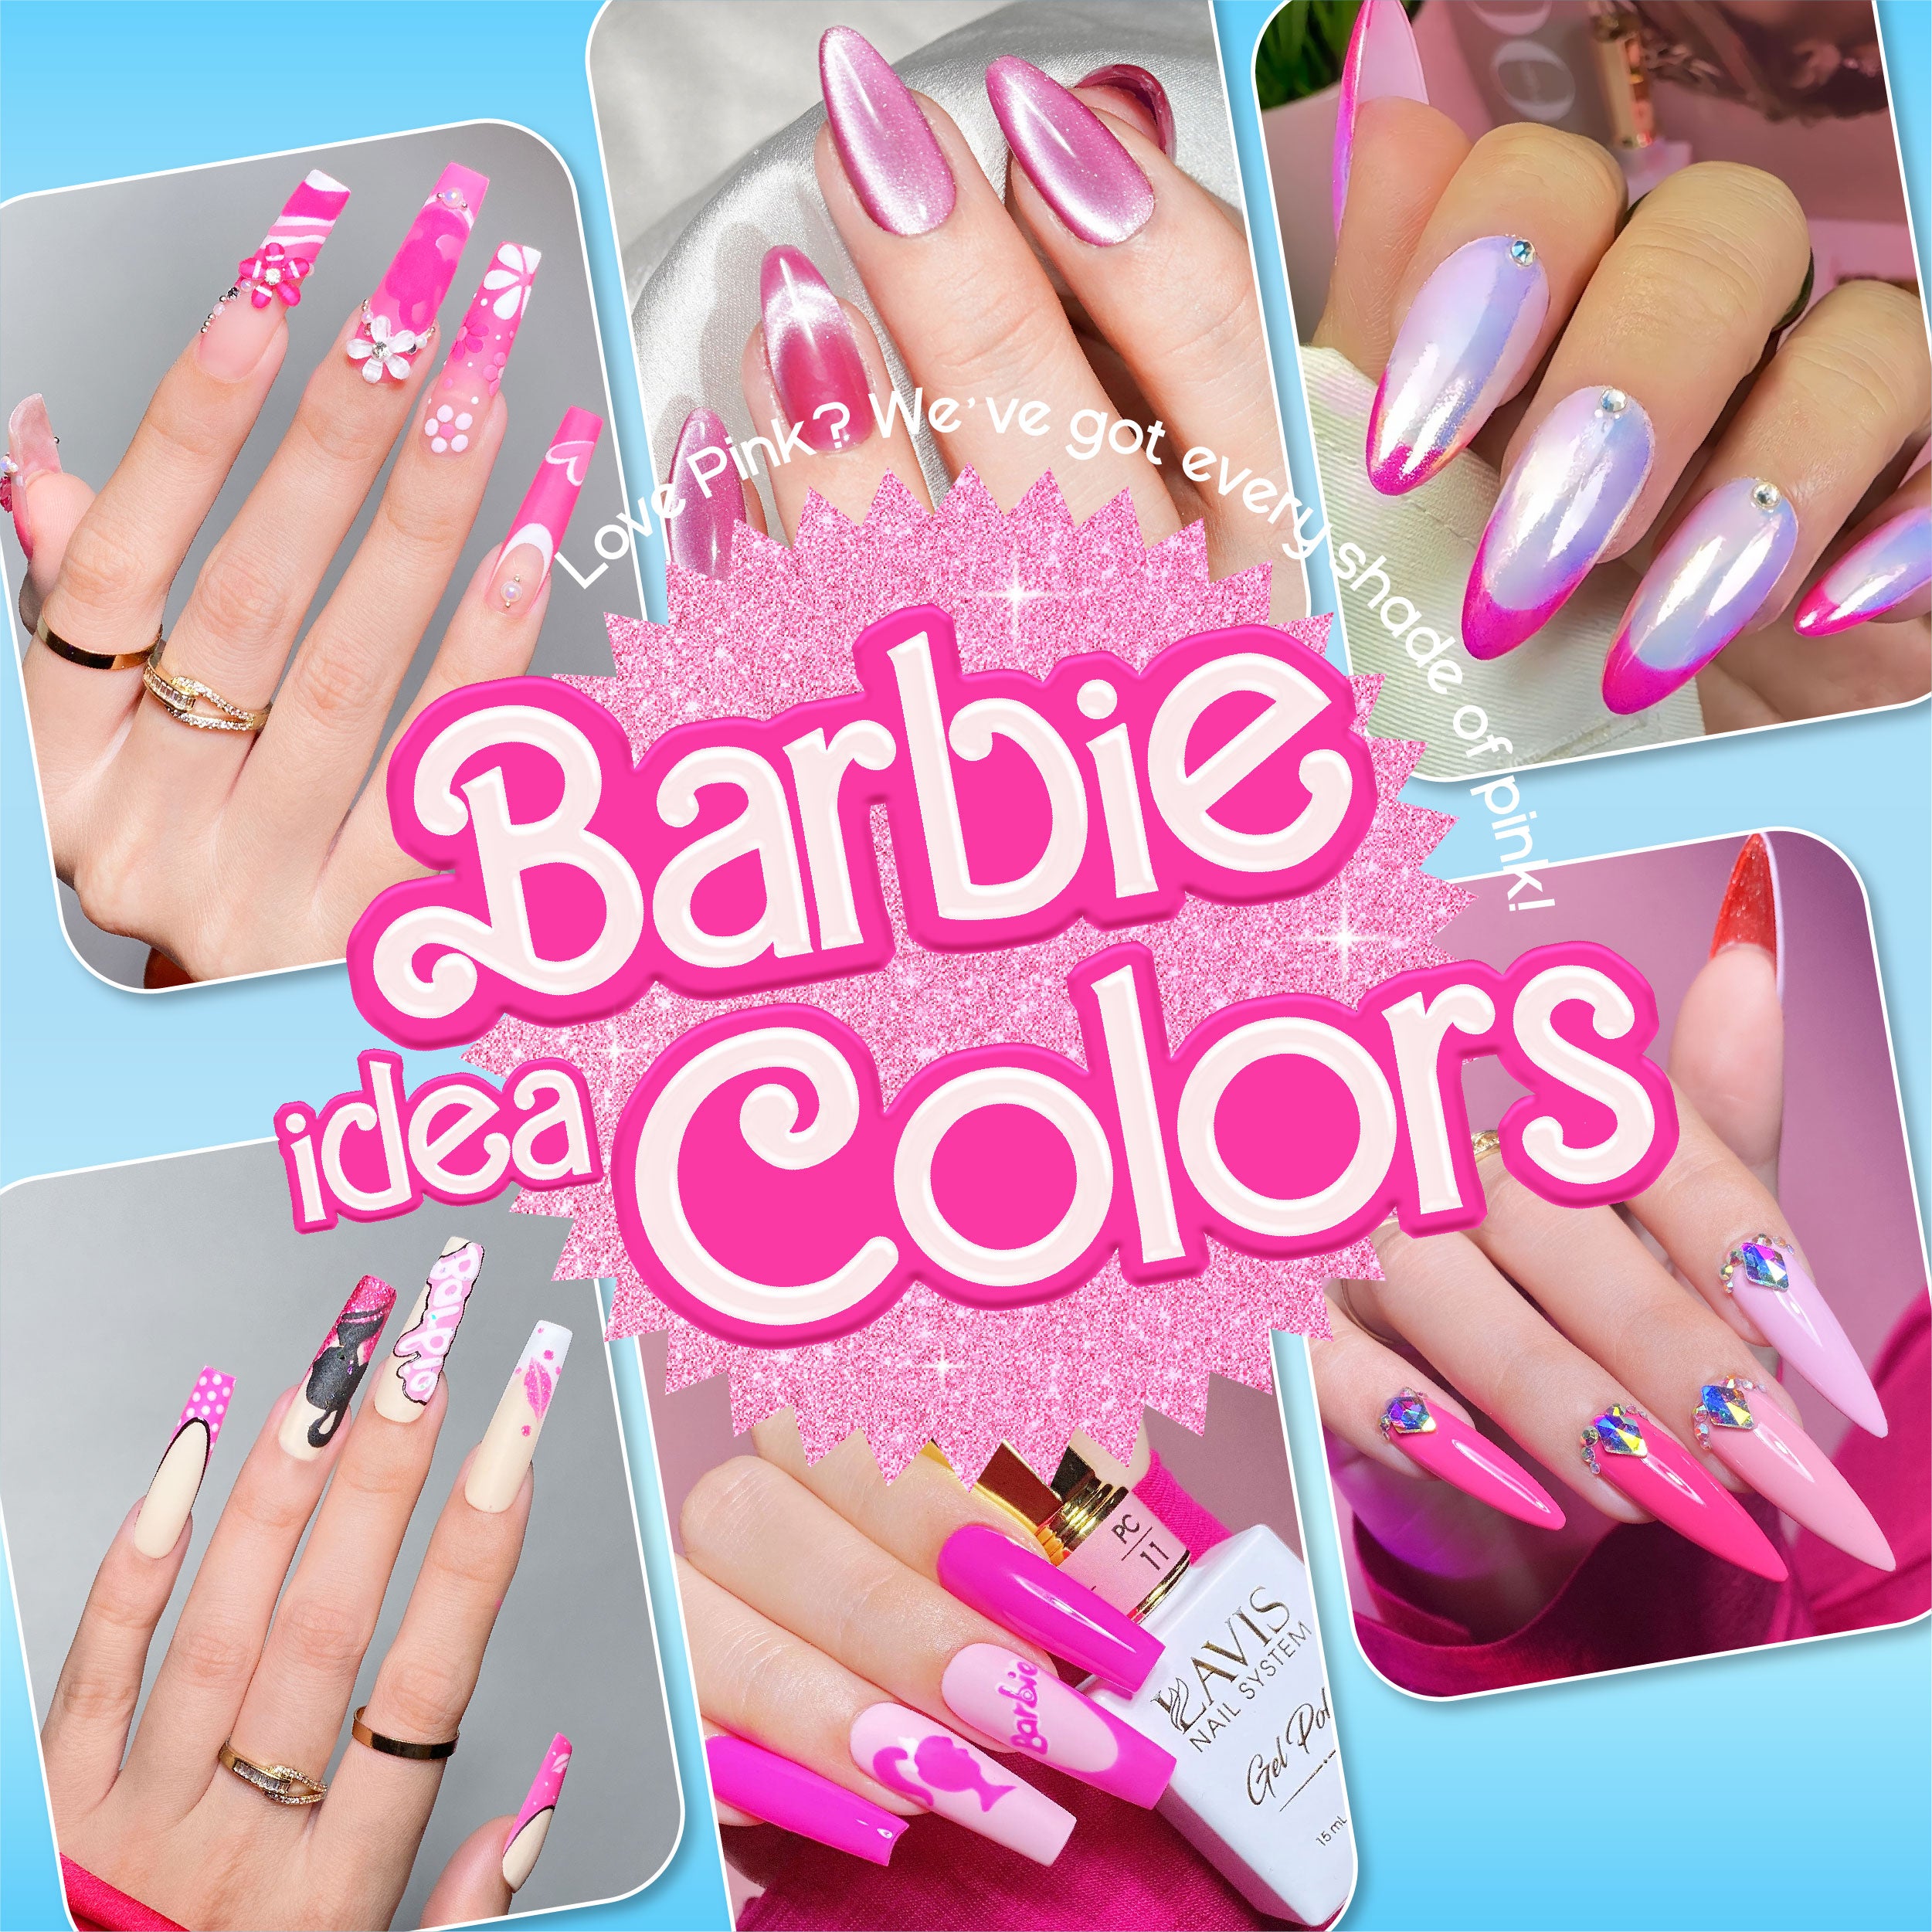 Barbie Pink Colors - Barbie Collection - DTK Nail Supply